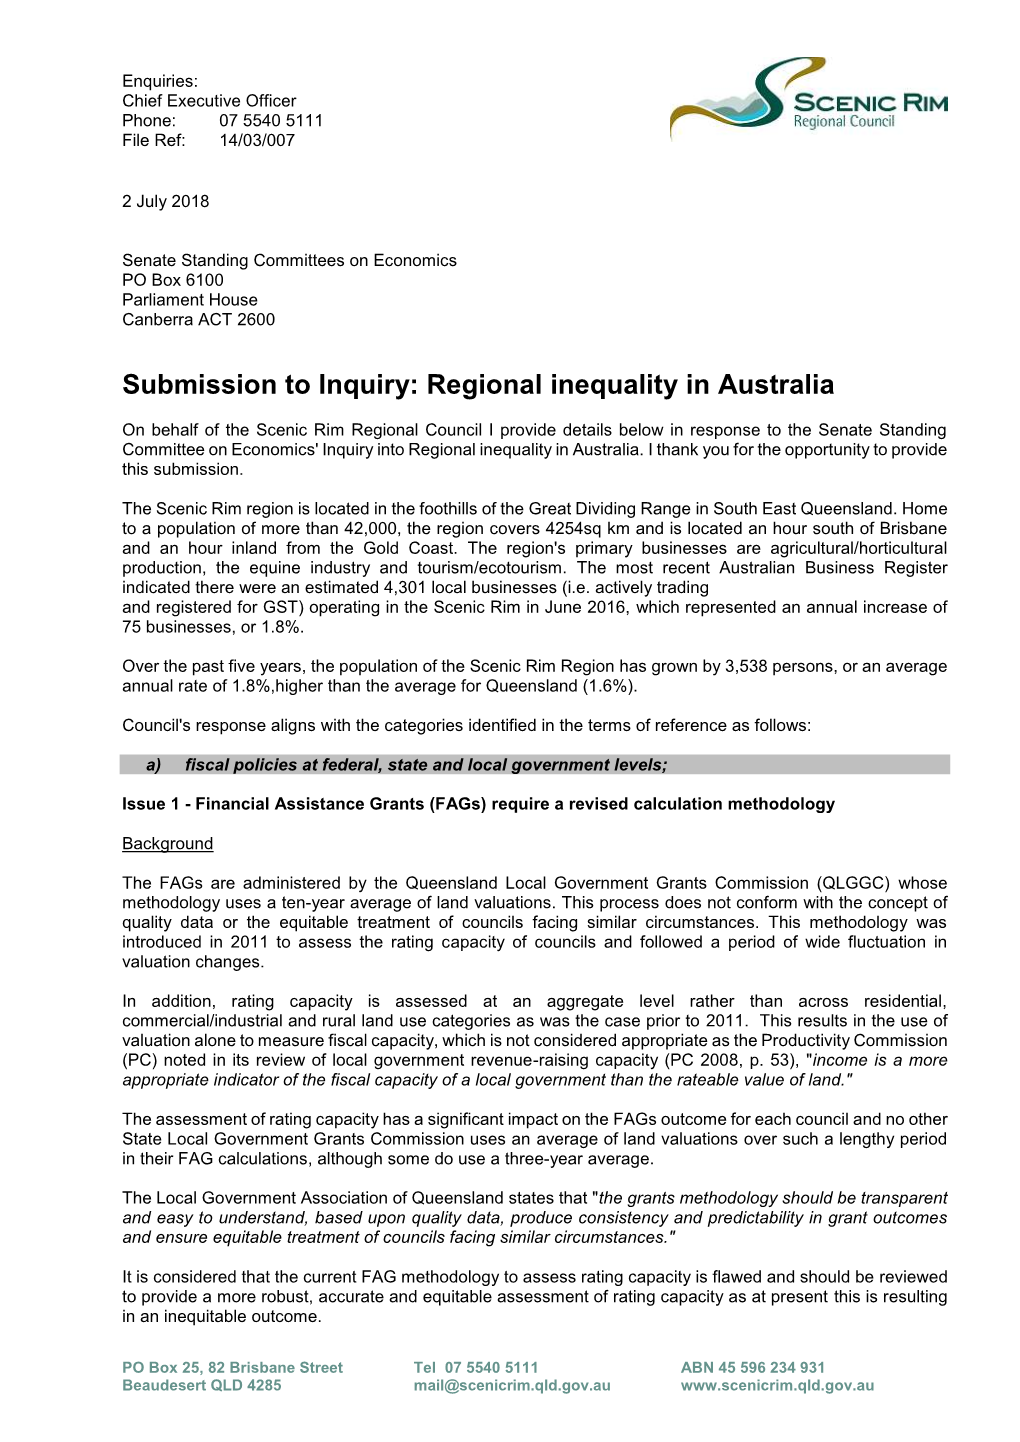 Submission to Inquiry: Regional Inequality in Australia